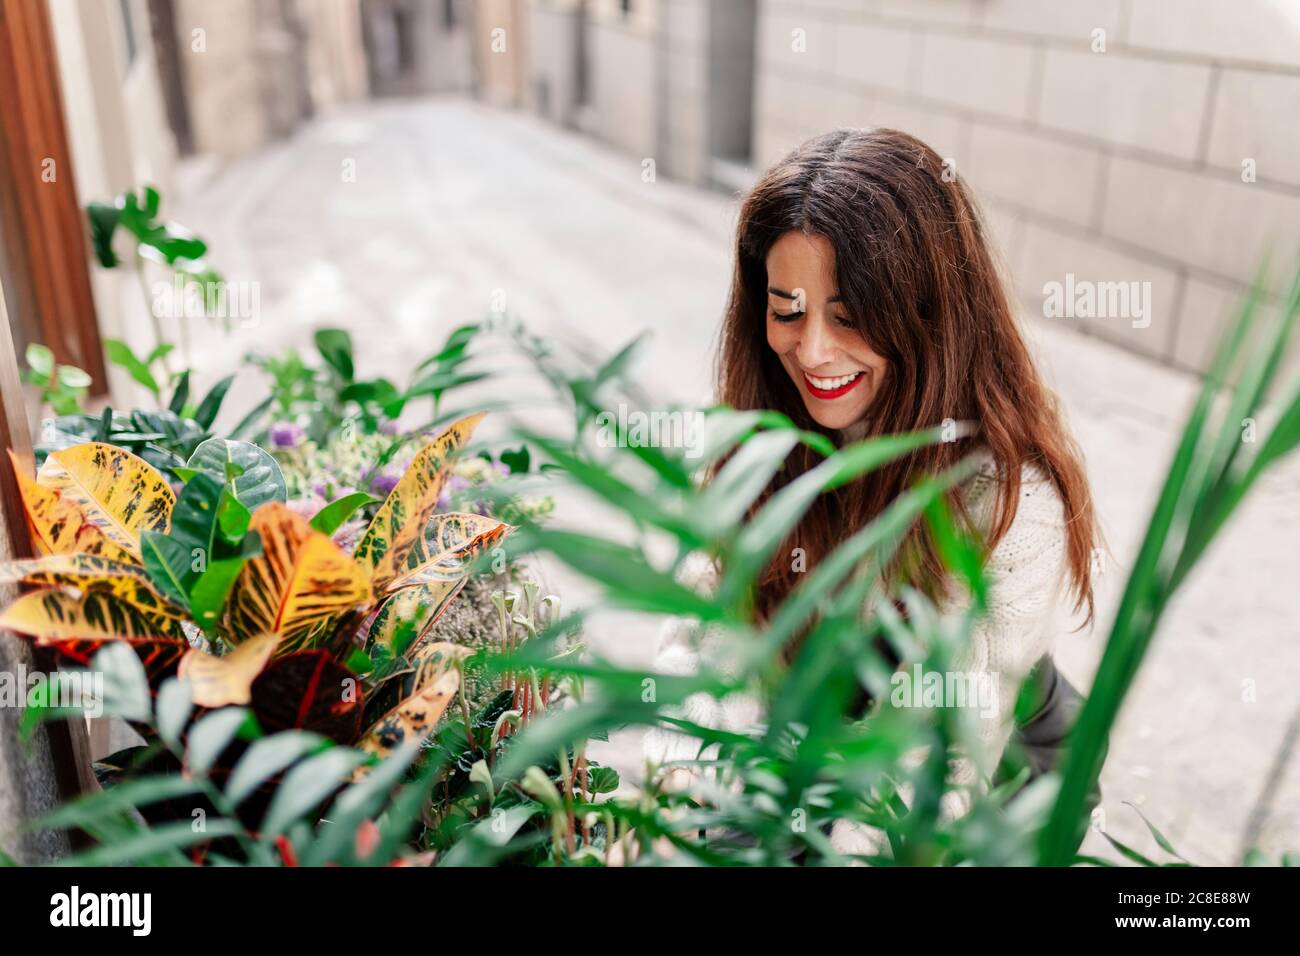 Smiling woman placing plants outside shop seen though window Stock Photo